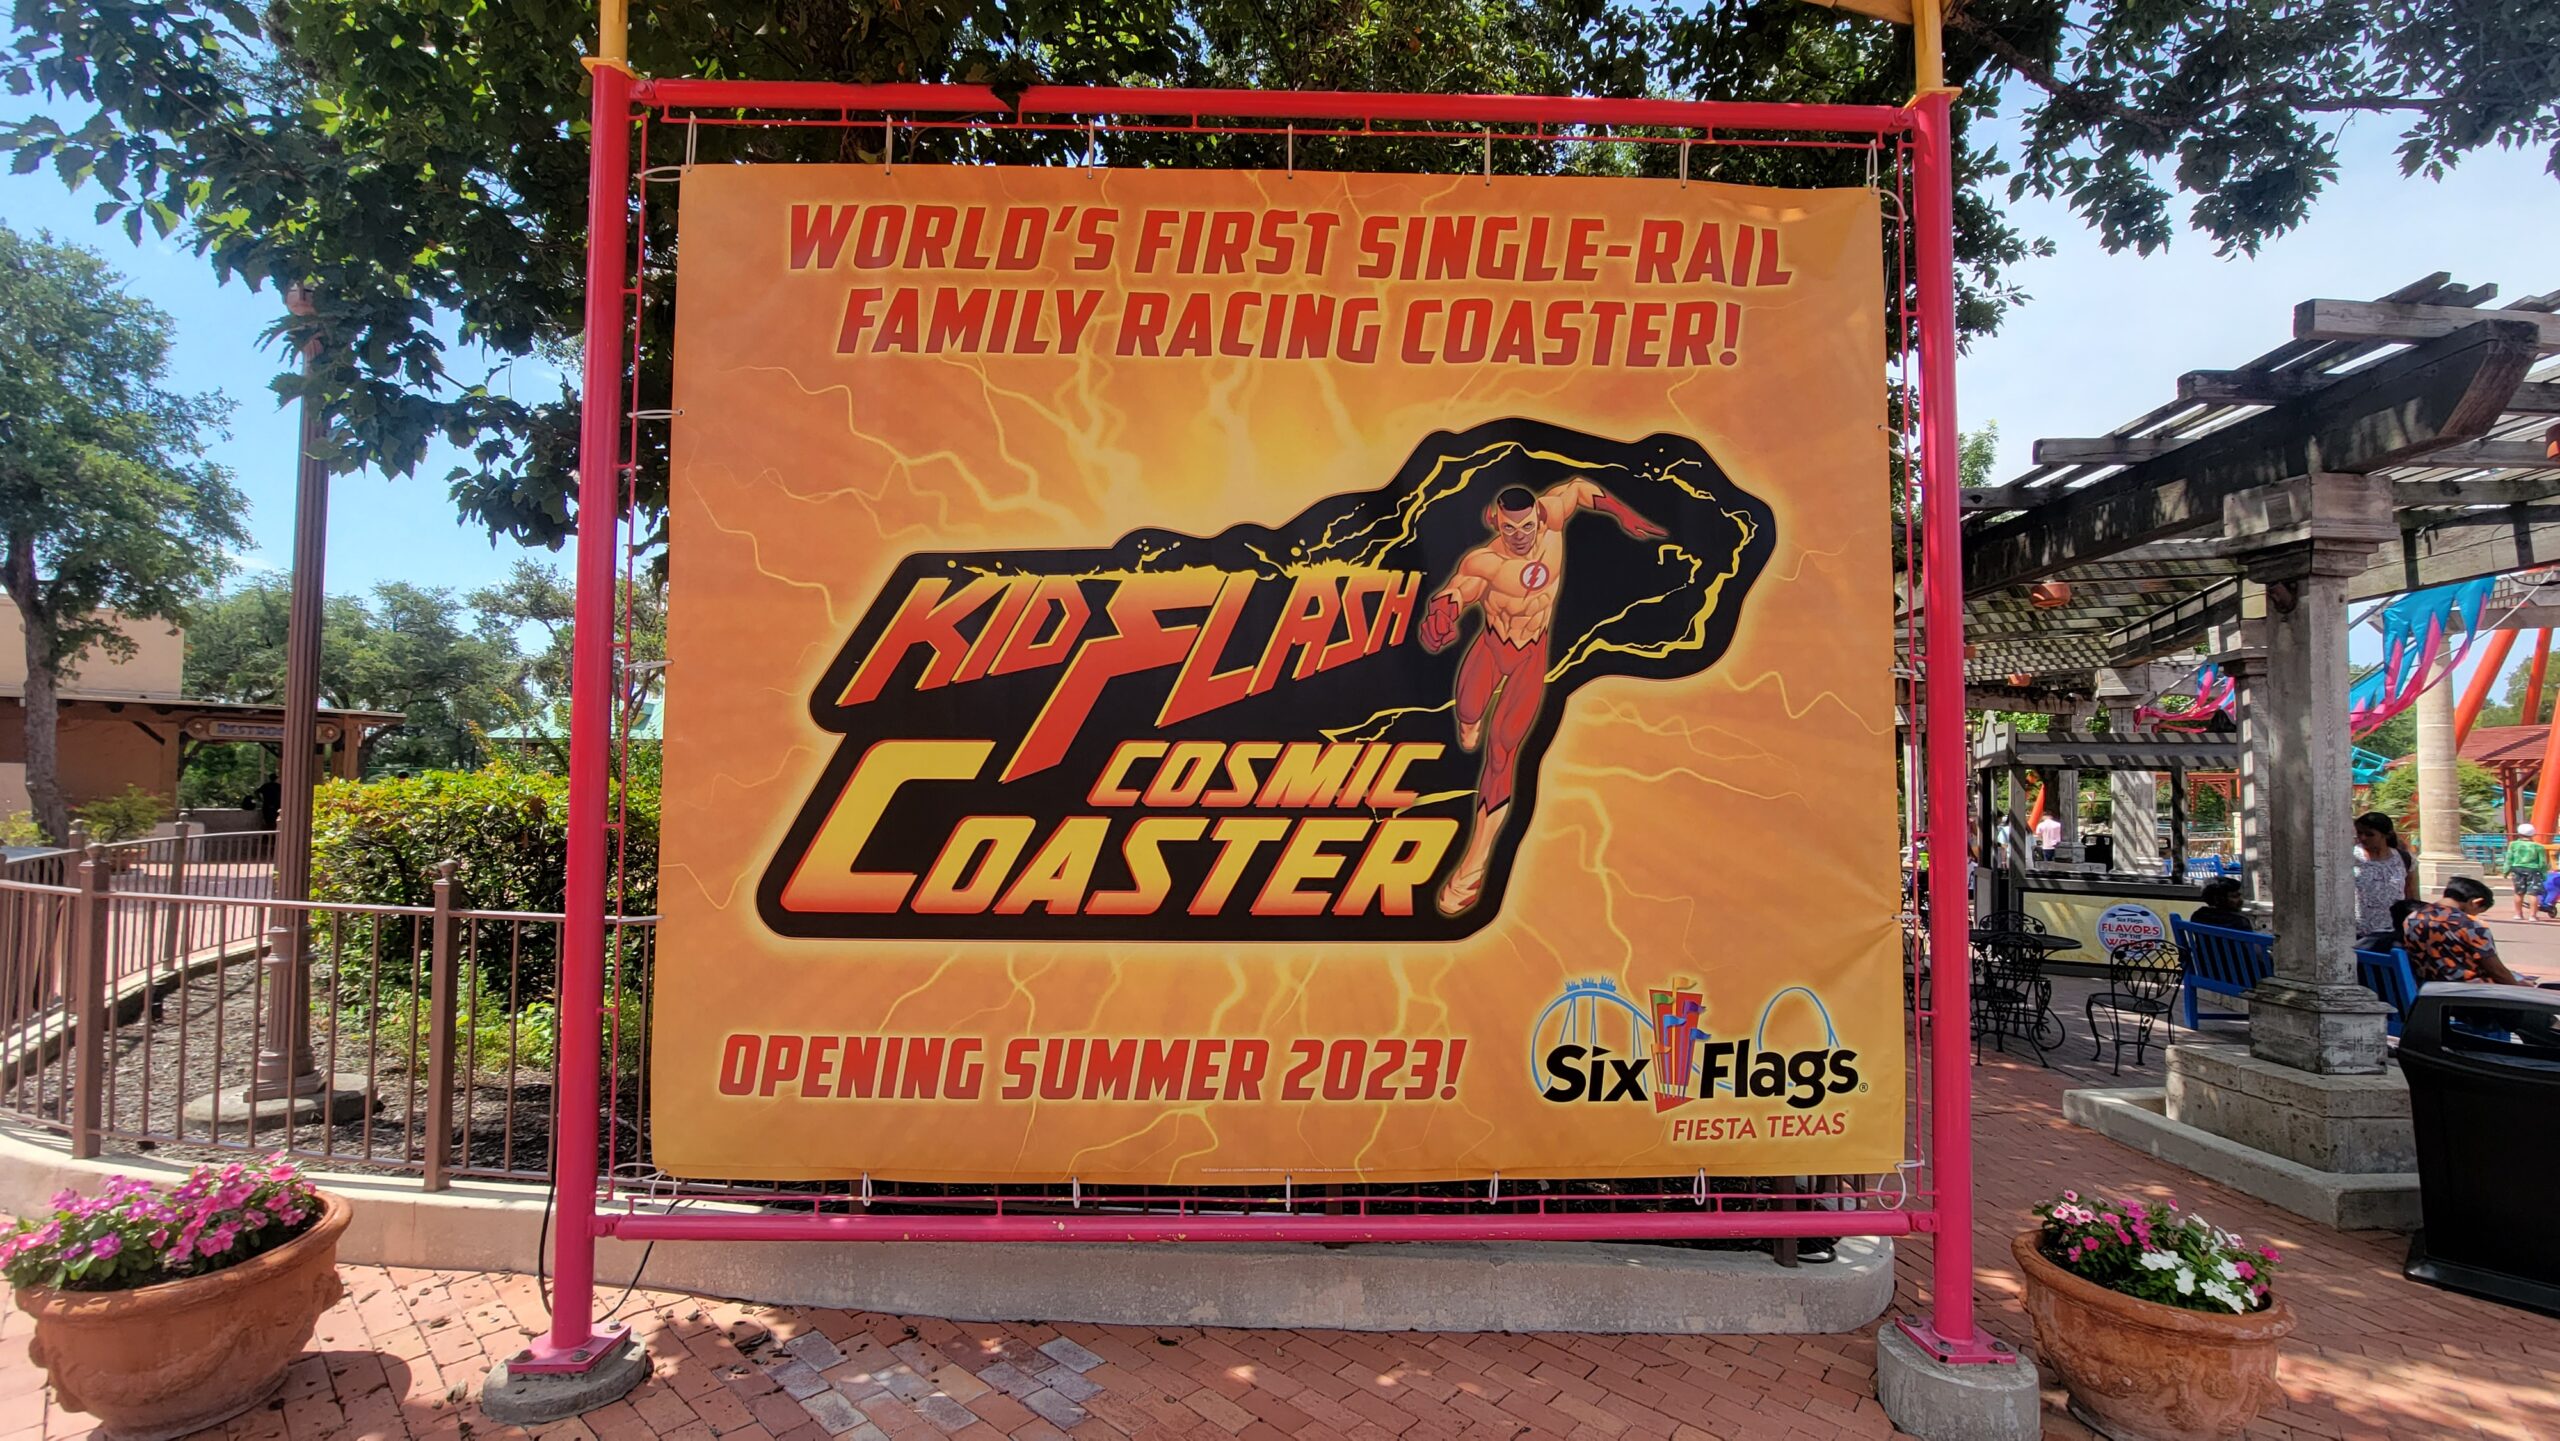 Six Flags Fiesta Texas Kid Flash Cosmic Coaster Construction Update 6.11.23 Track Arrives & More!